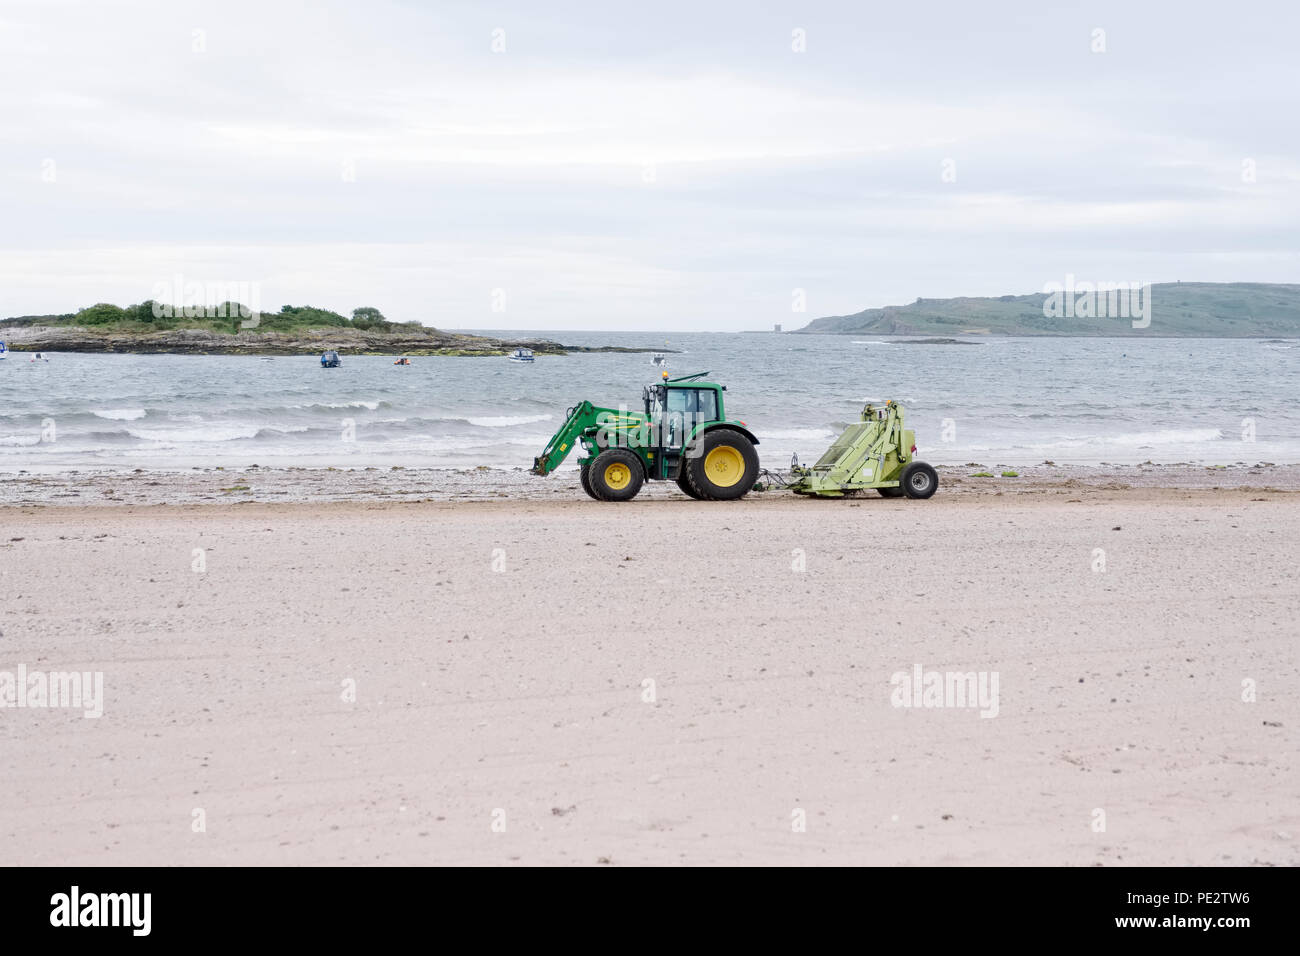 Tractor on sandy beach cleaning up rubbish and litter to help clean the environment and prevent pollution Stock Photo